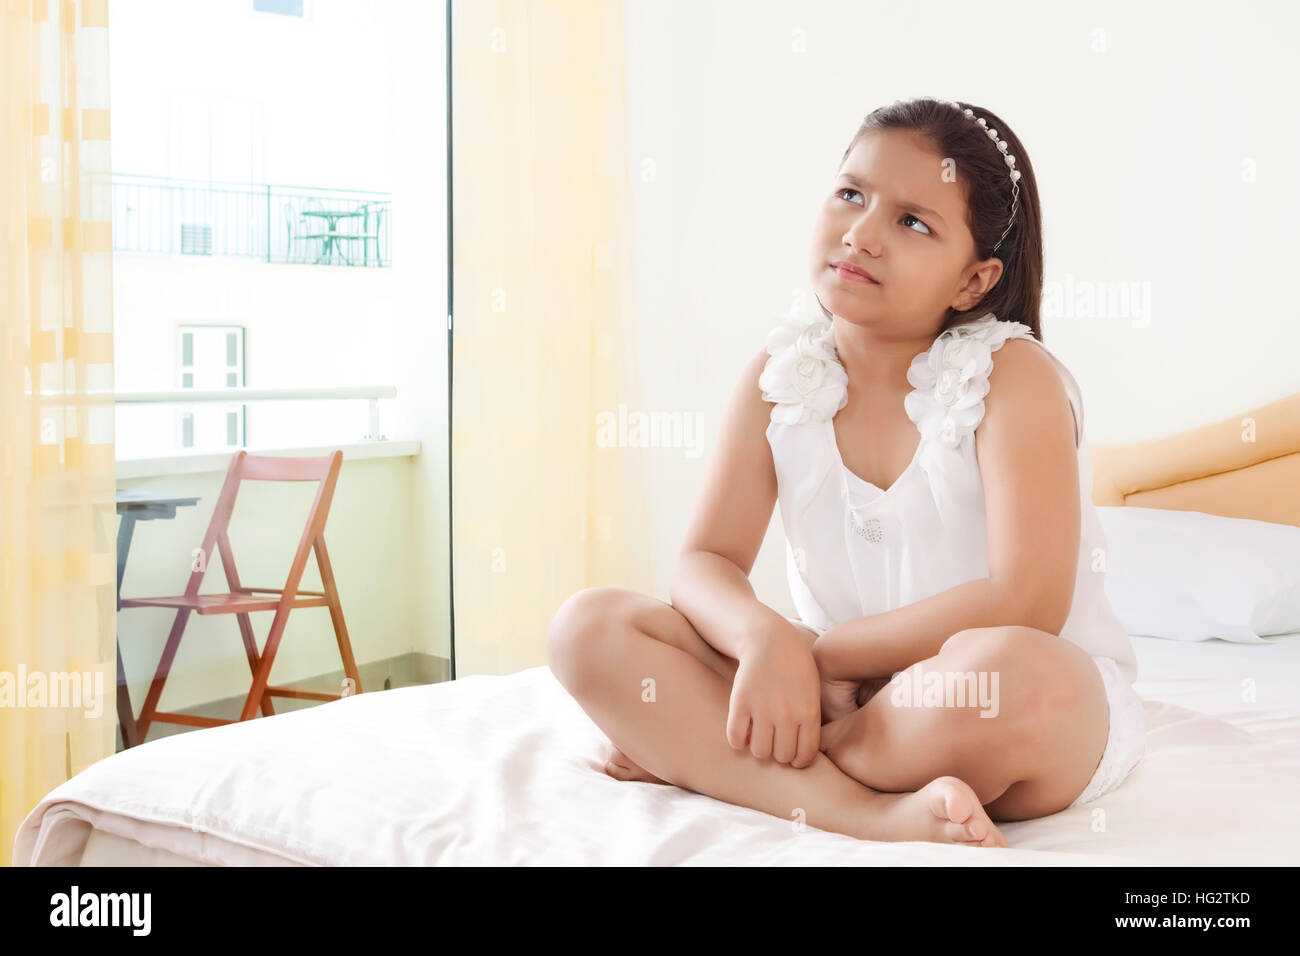 Pensive girl sitting on bed Stock Photo